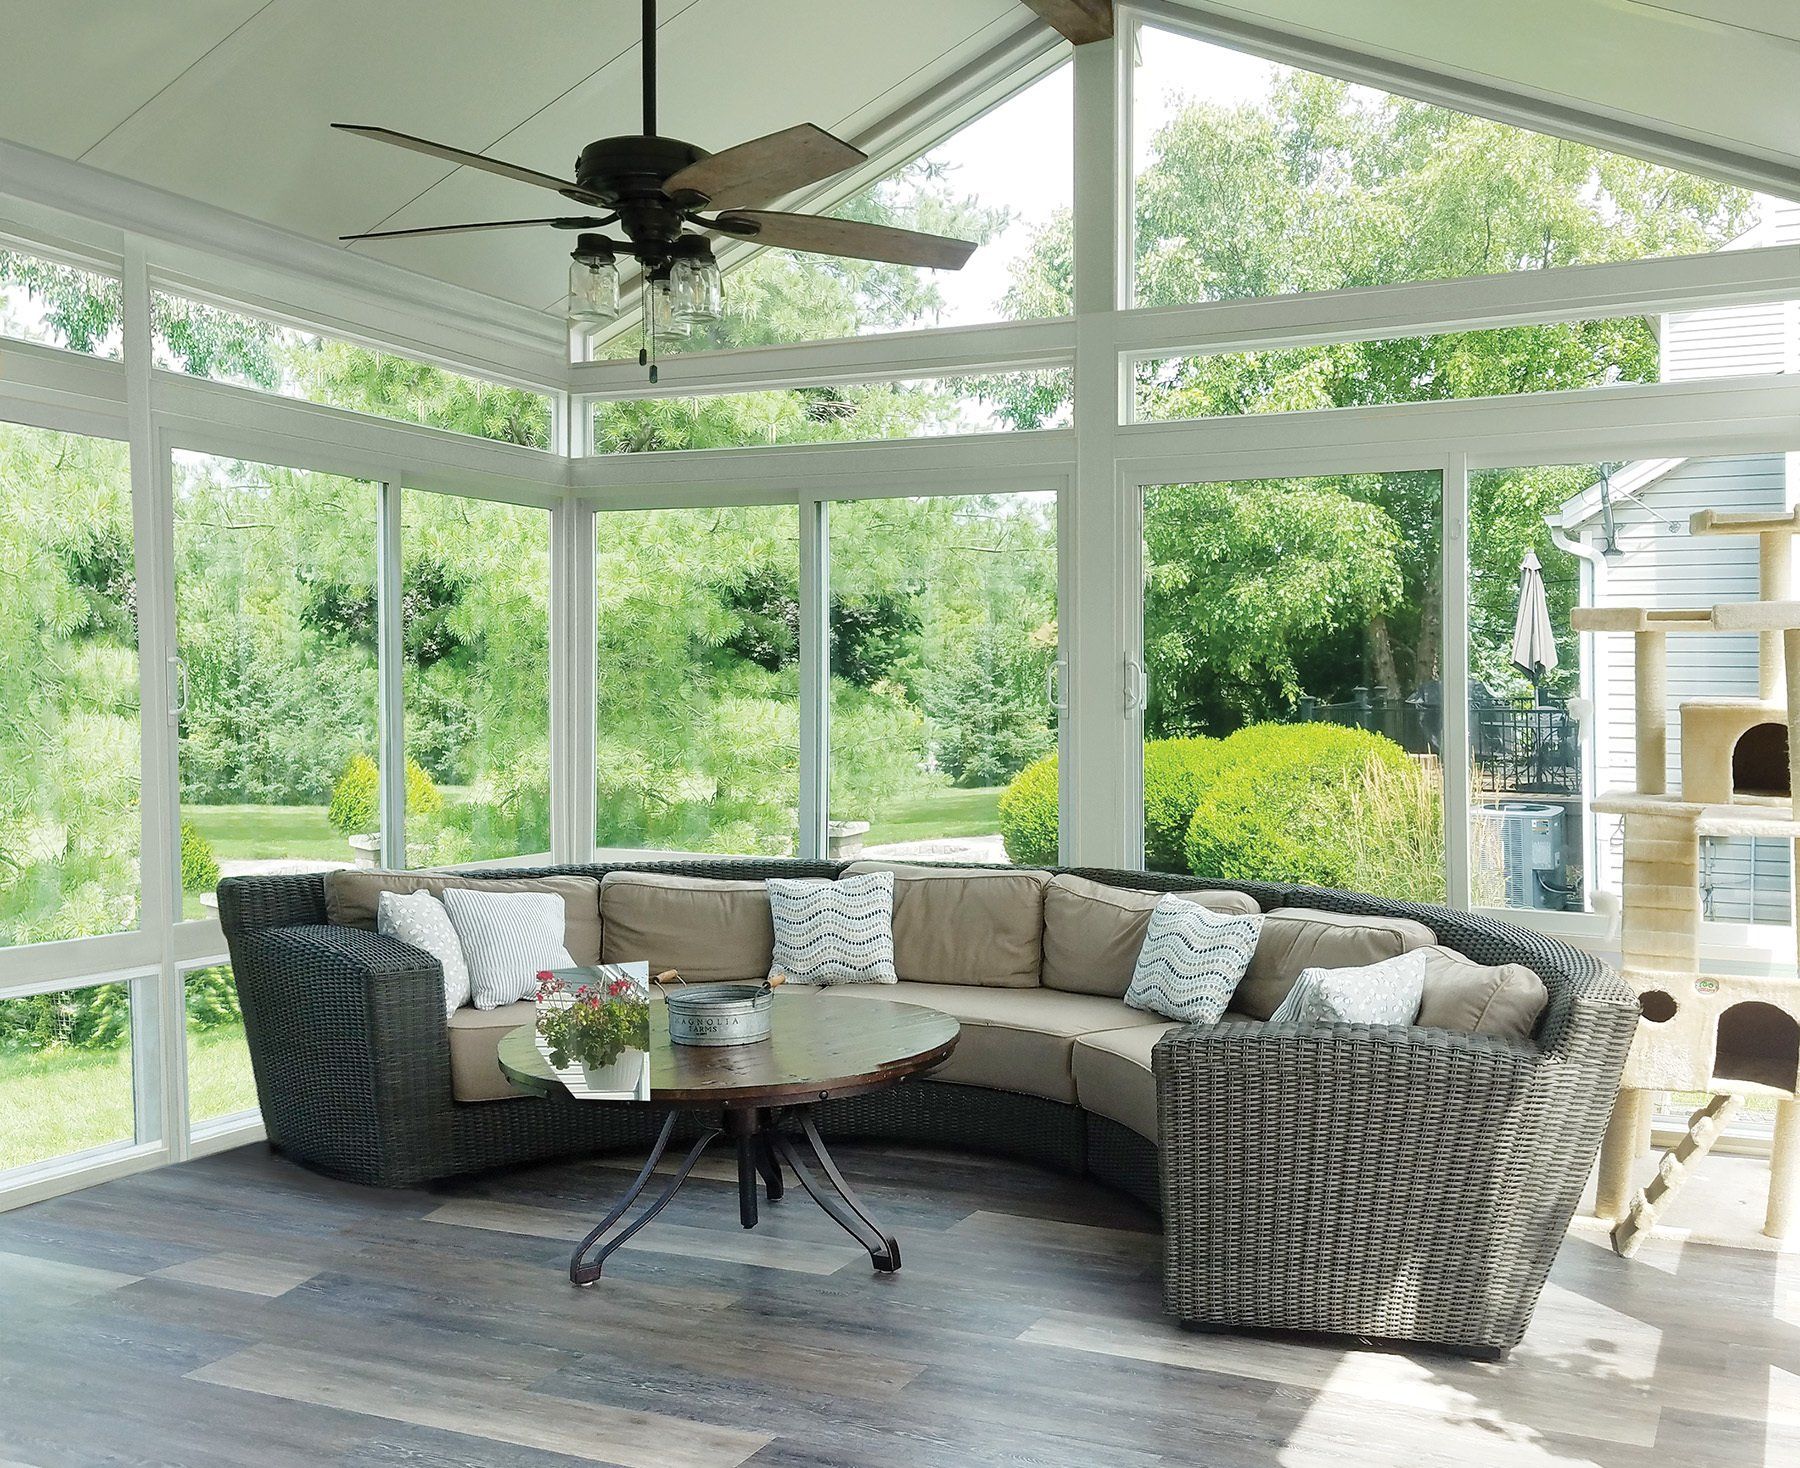 Inside sunroom photo by Betterliving Patio and Sunrooms of Pittsburgh